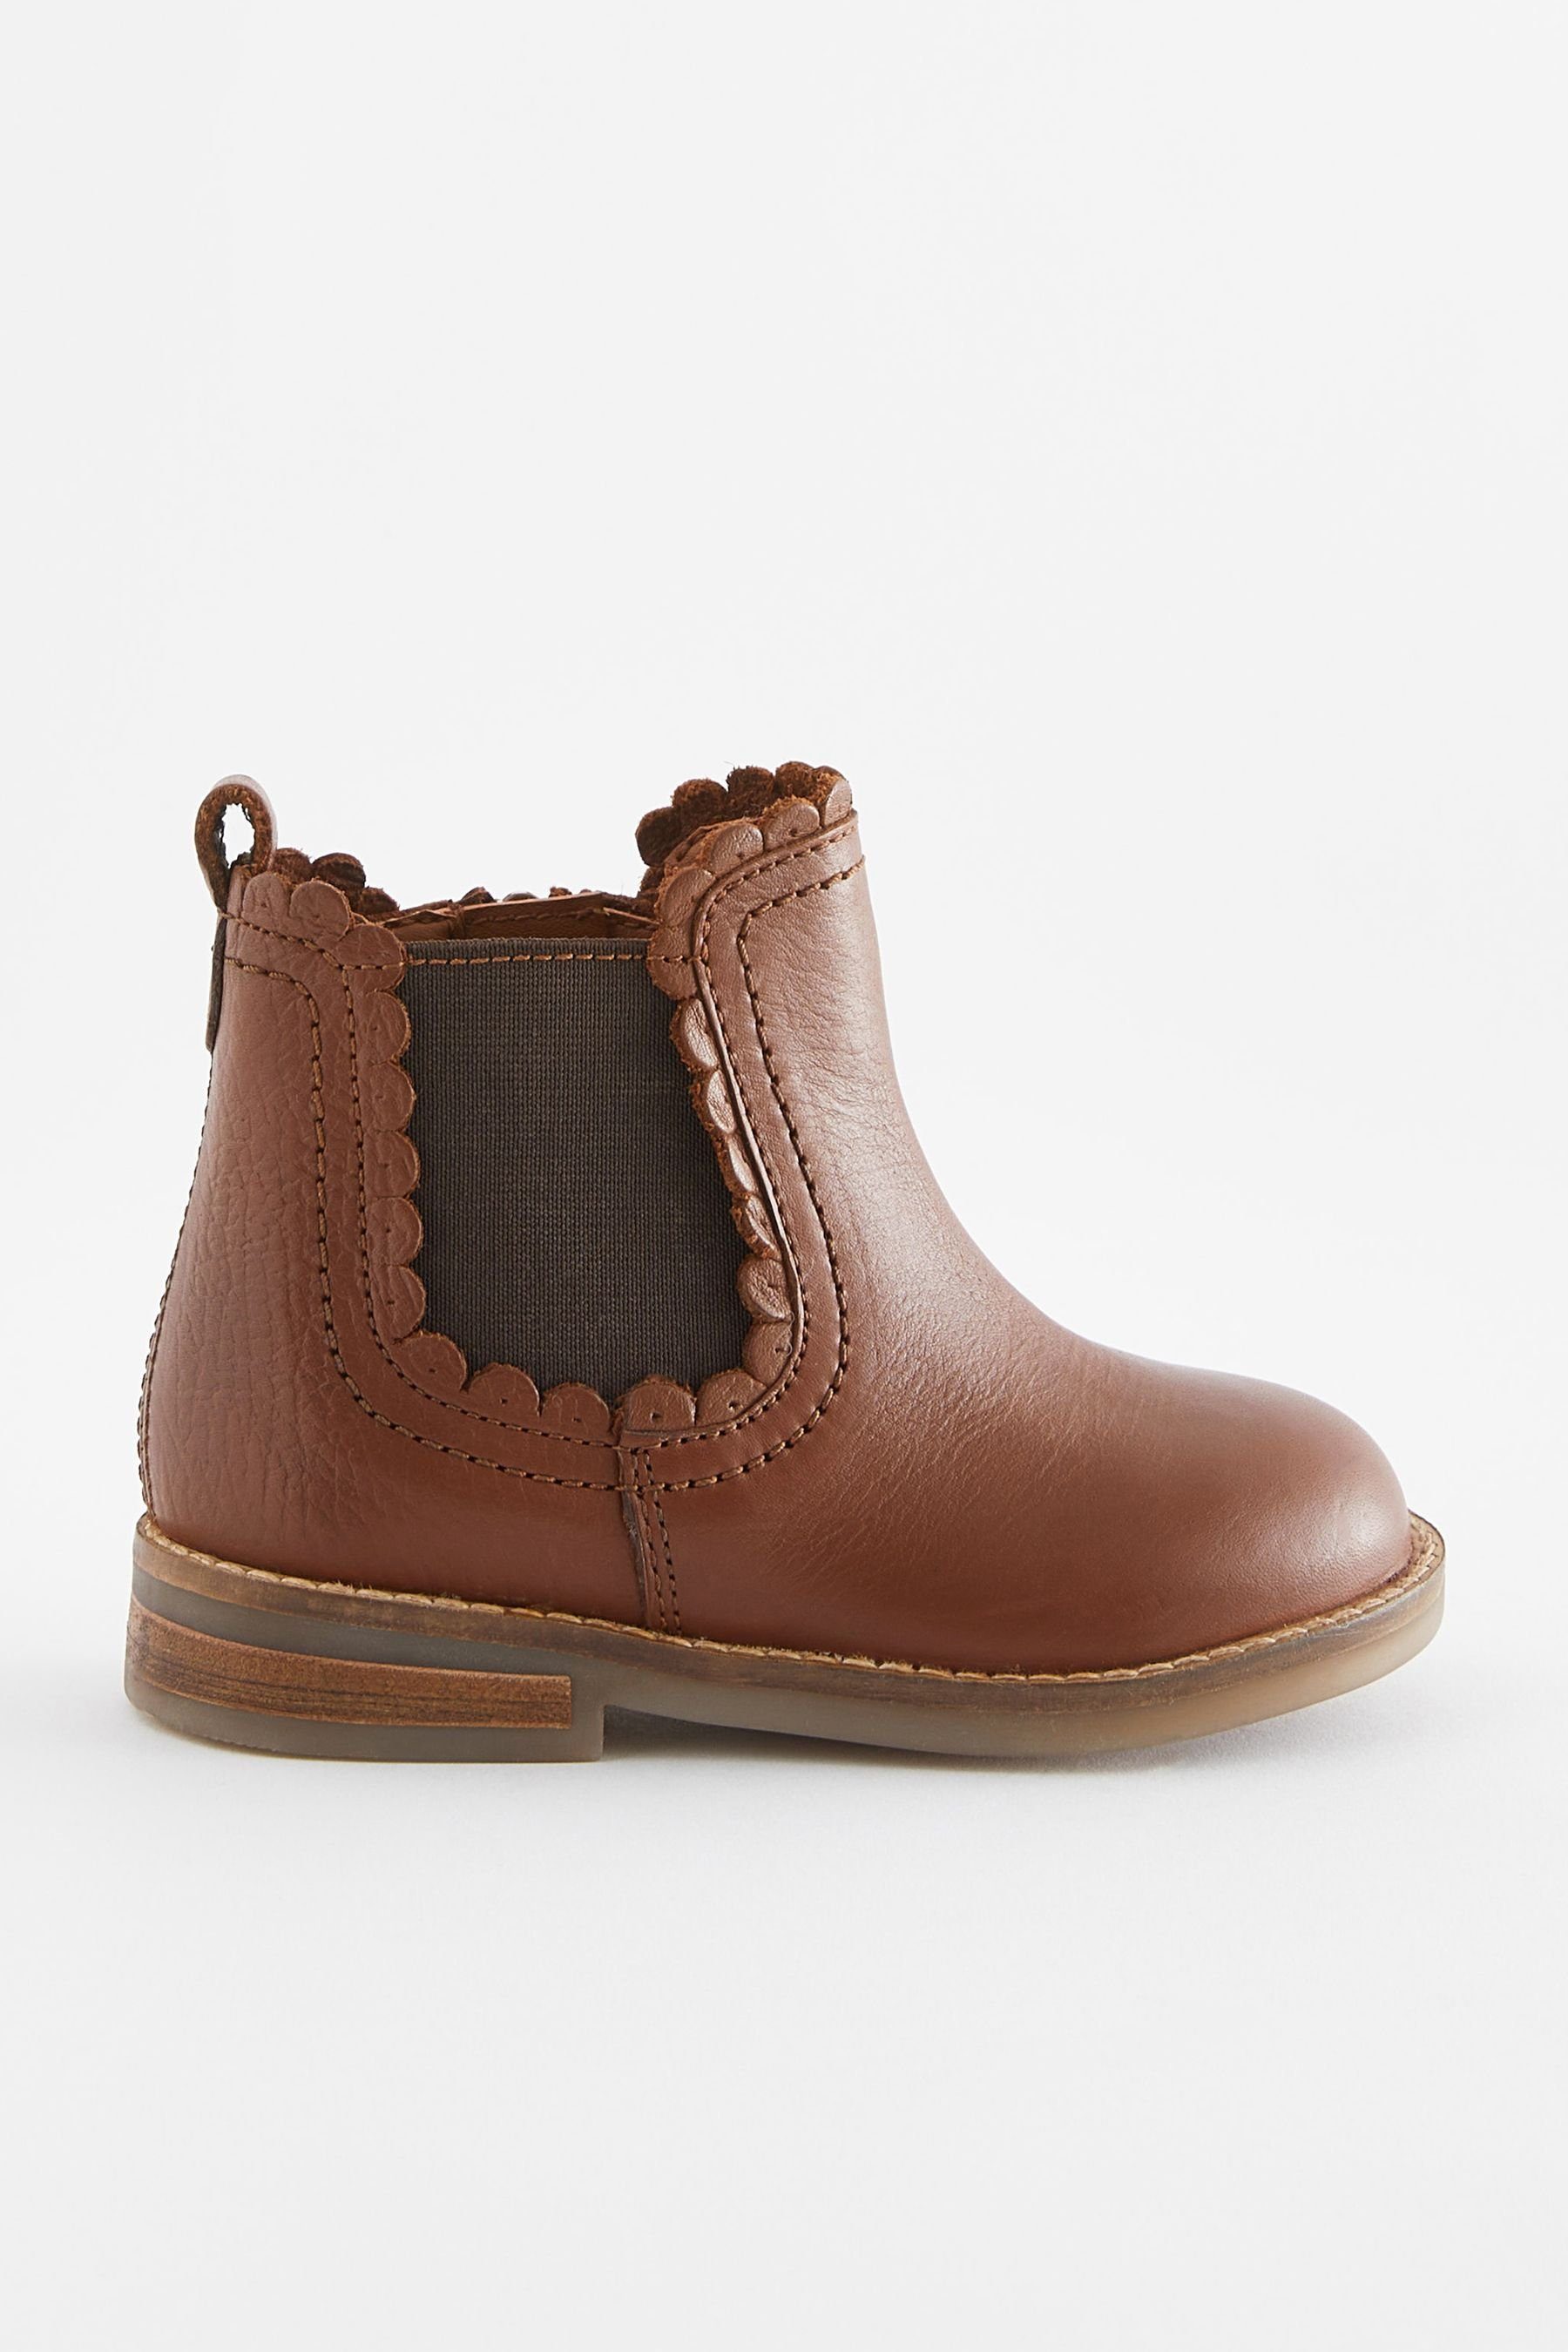 Next Chelsea-Boots mit Bogenkante, weite Passform Chelseaboots (1-tlg) Tan Brown Leather